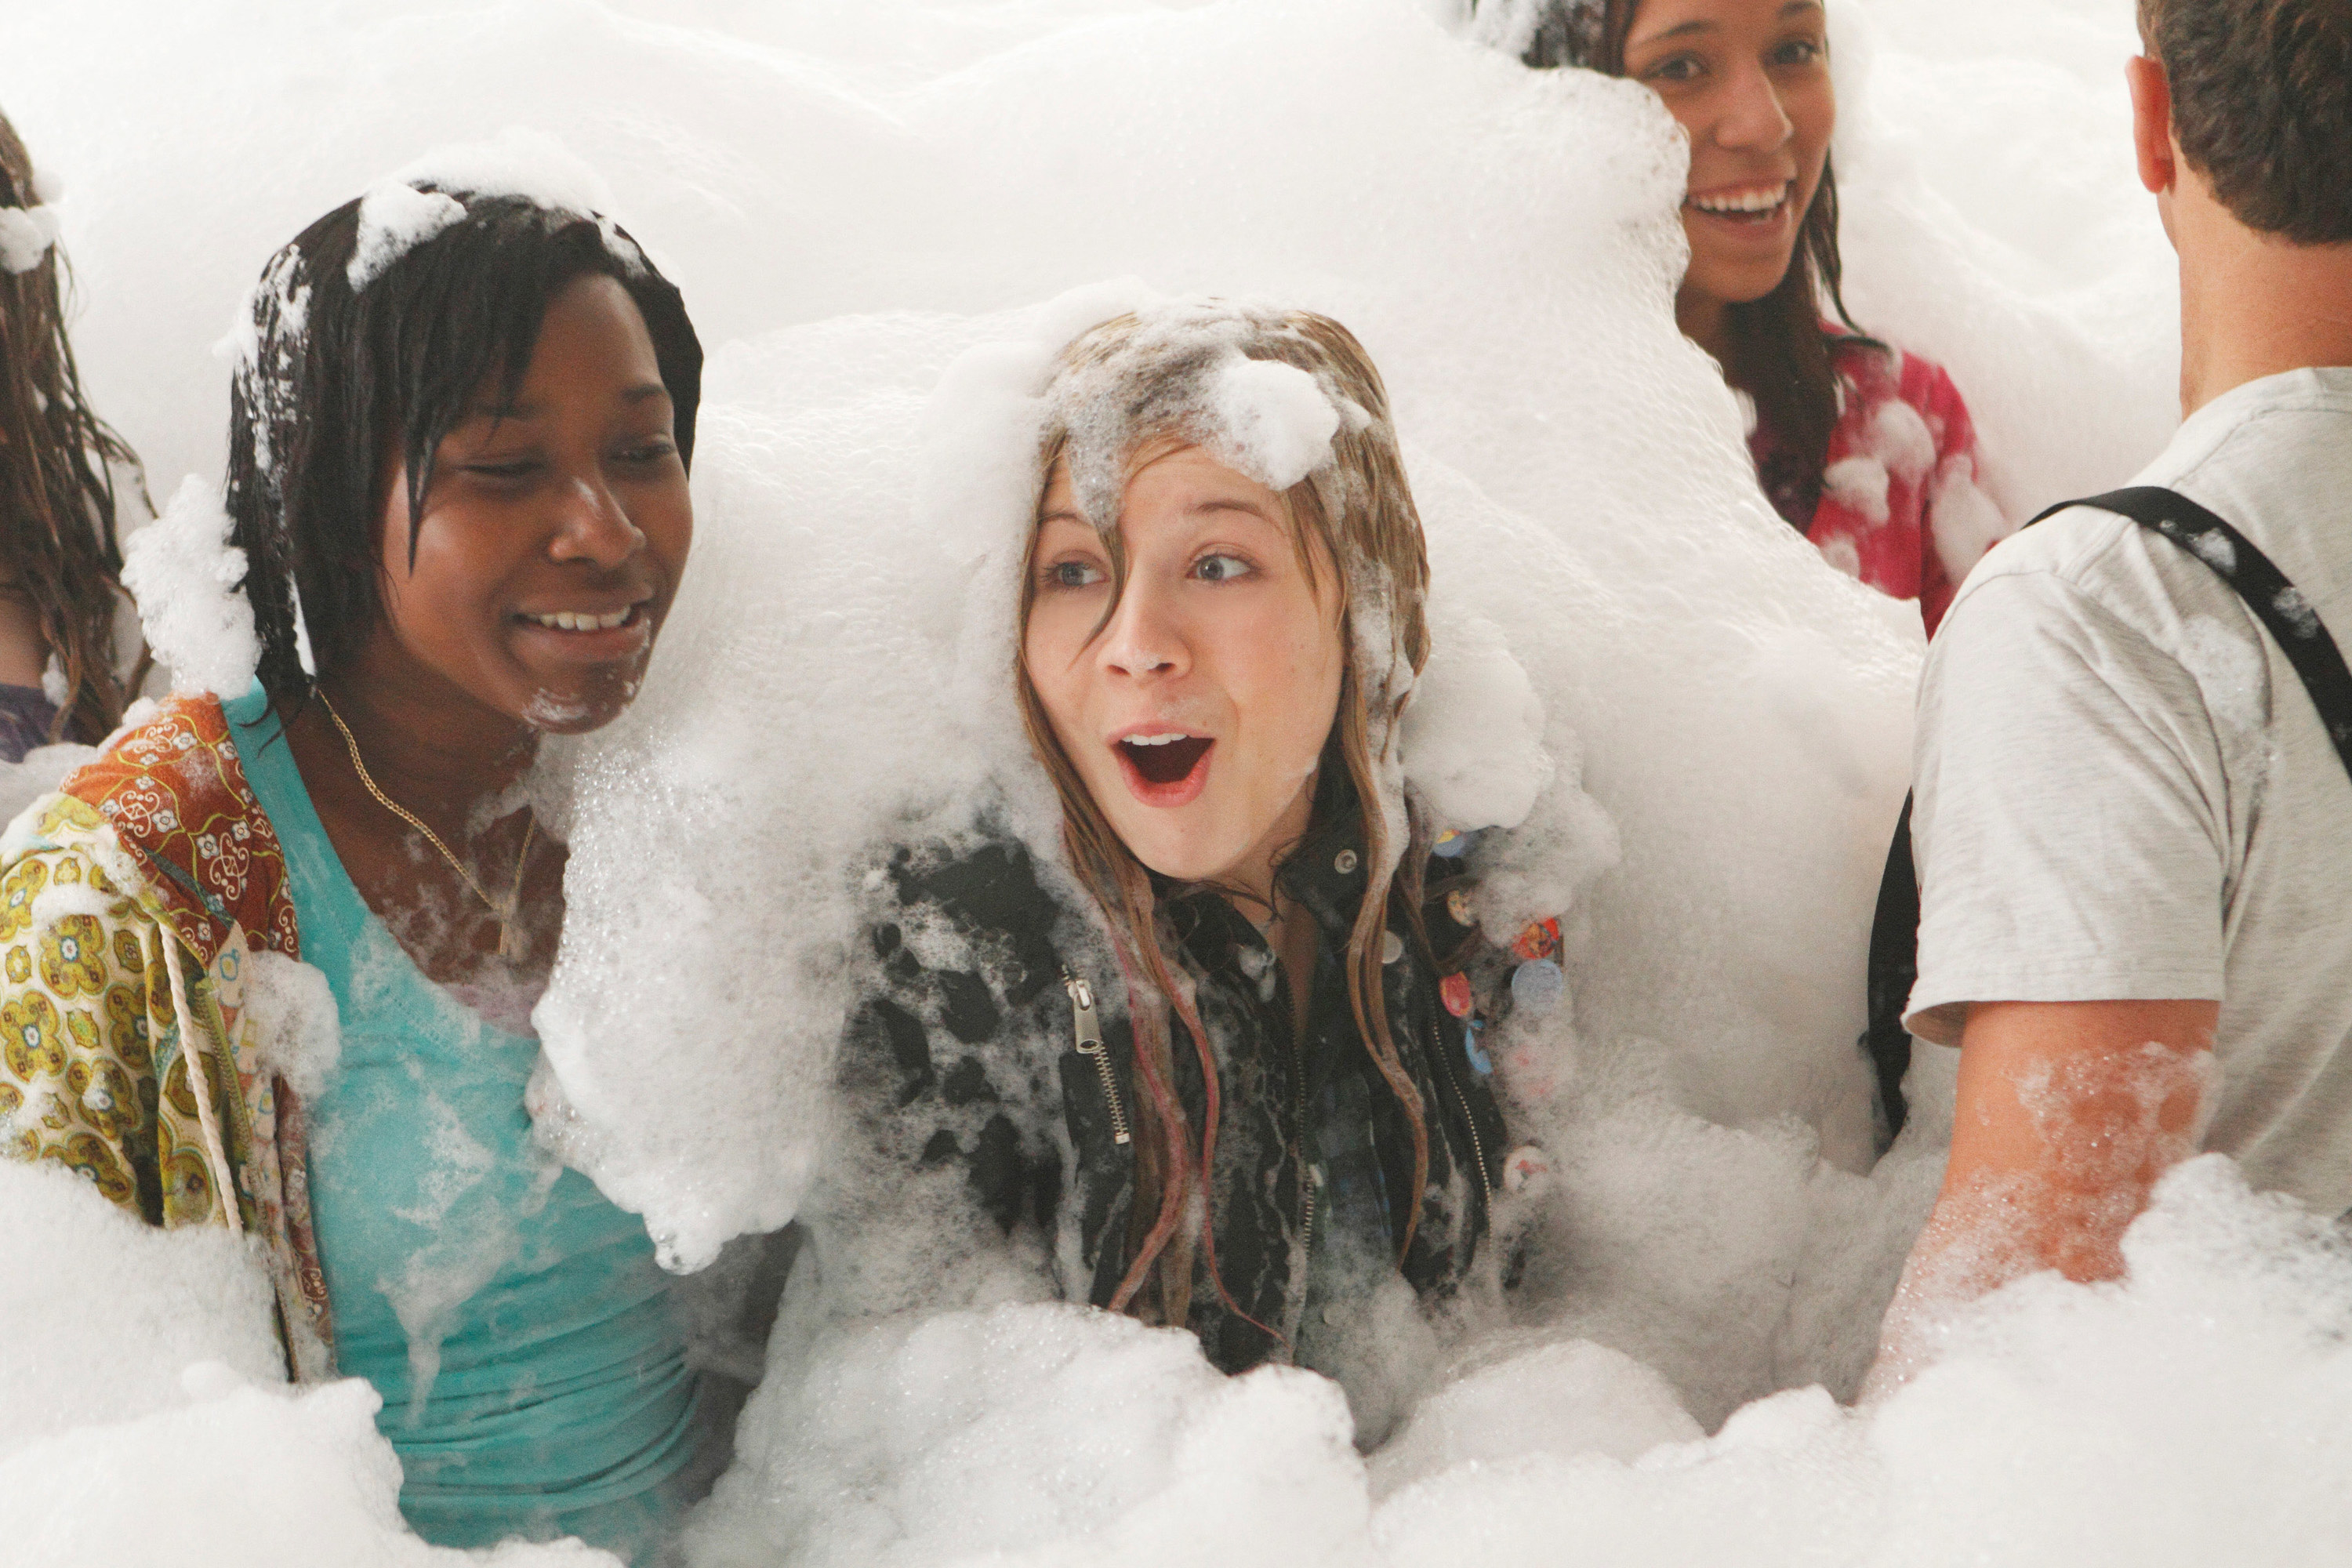 Jennette with other young people covered in foam